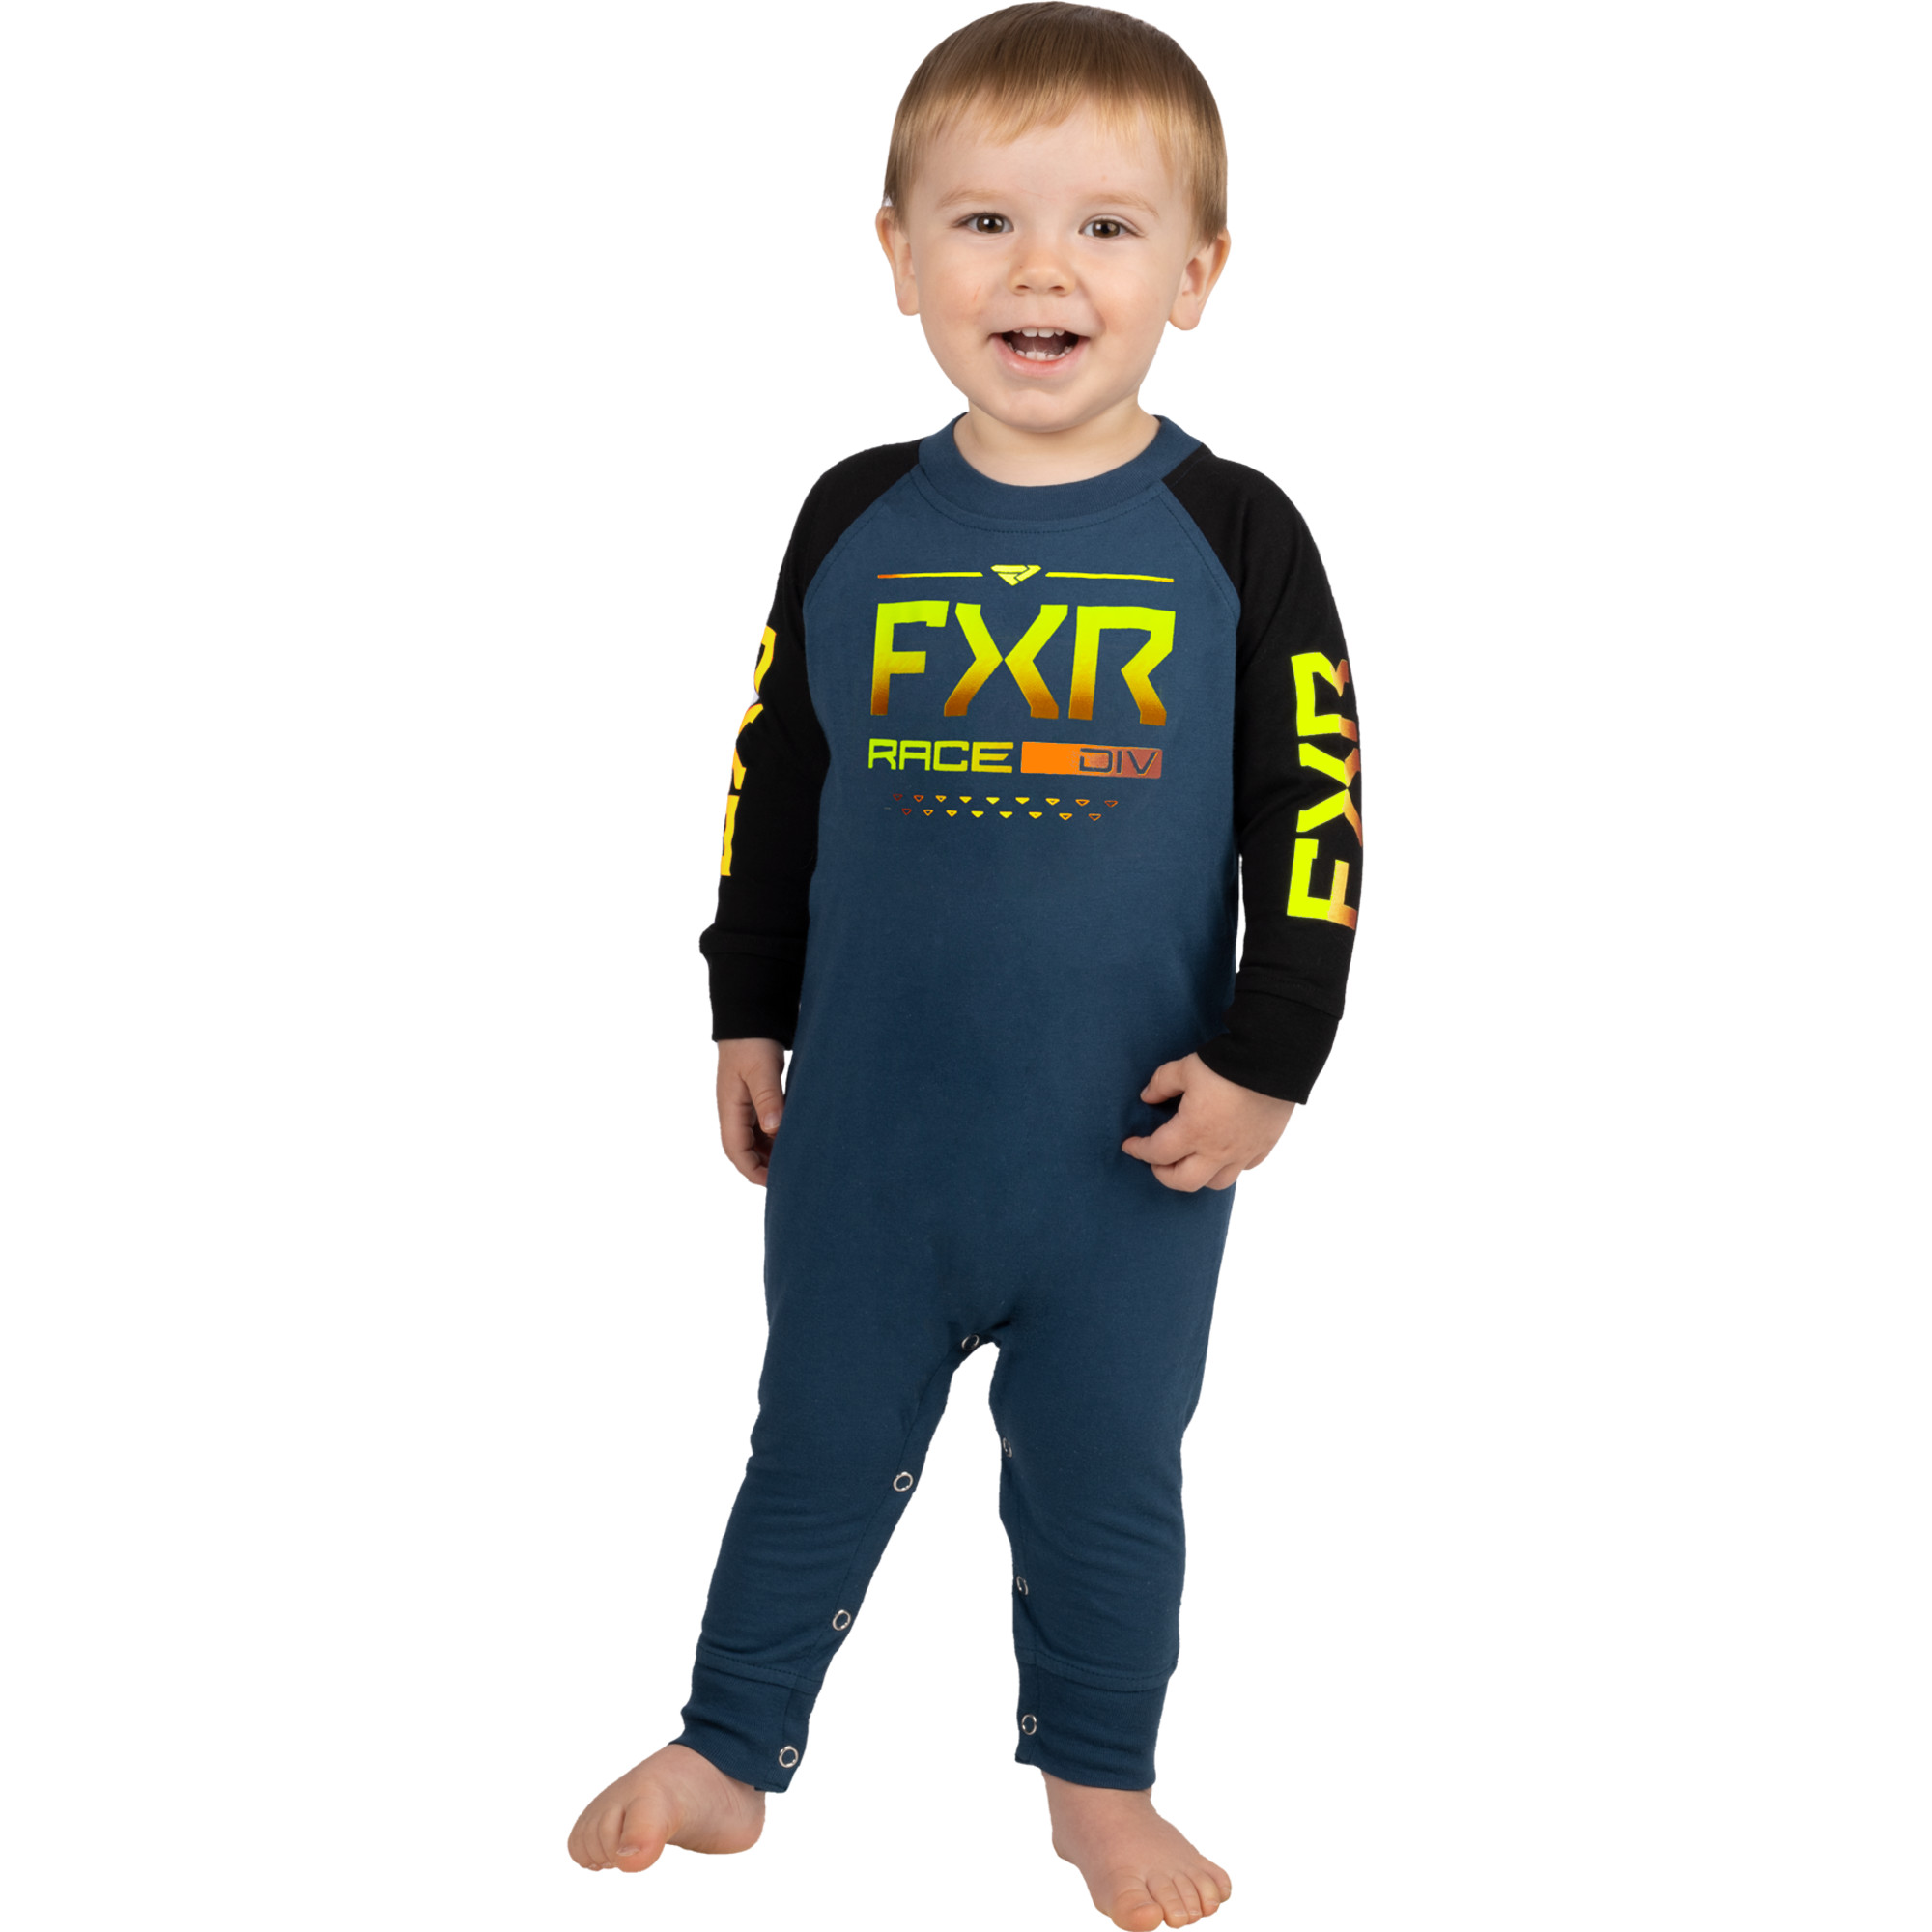 fxr racing pajamas kids for infant race division